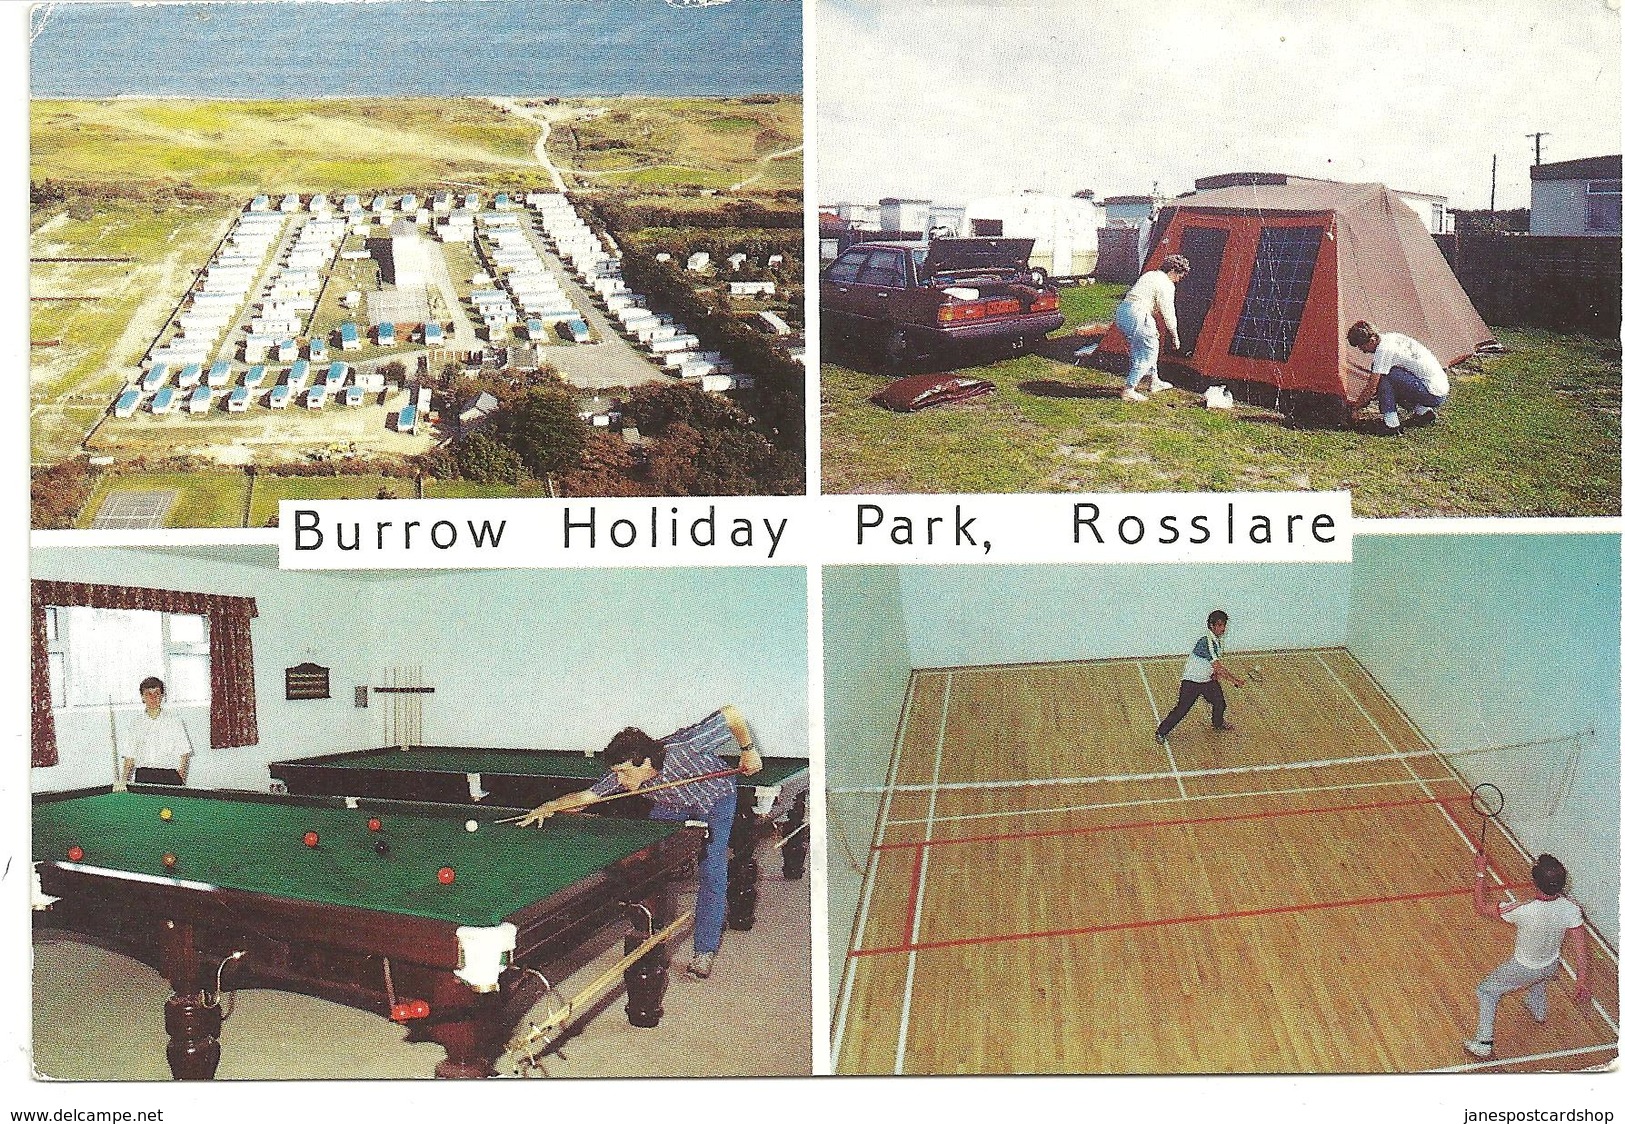 BURROW HOLIDAY PARK - ROSSLARE - CO. WEXFORD - Wexford